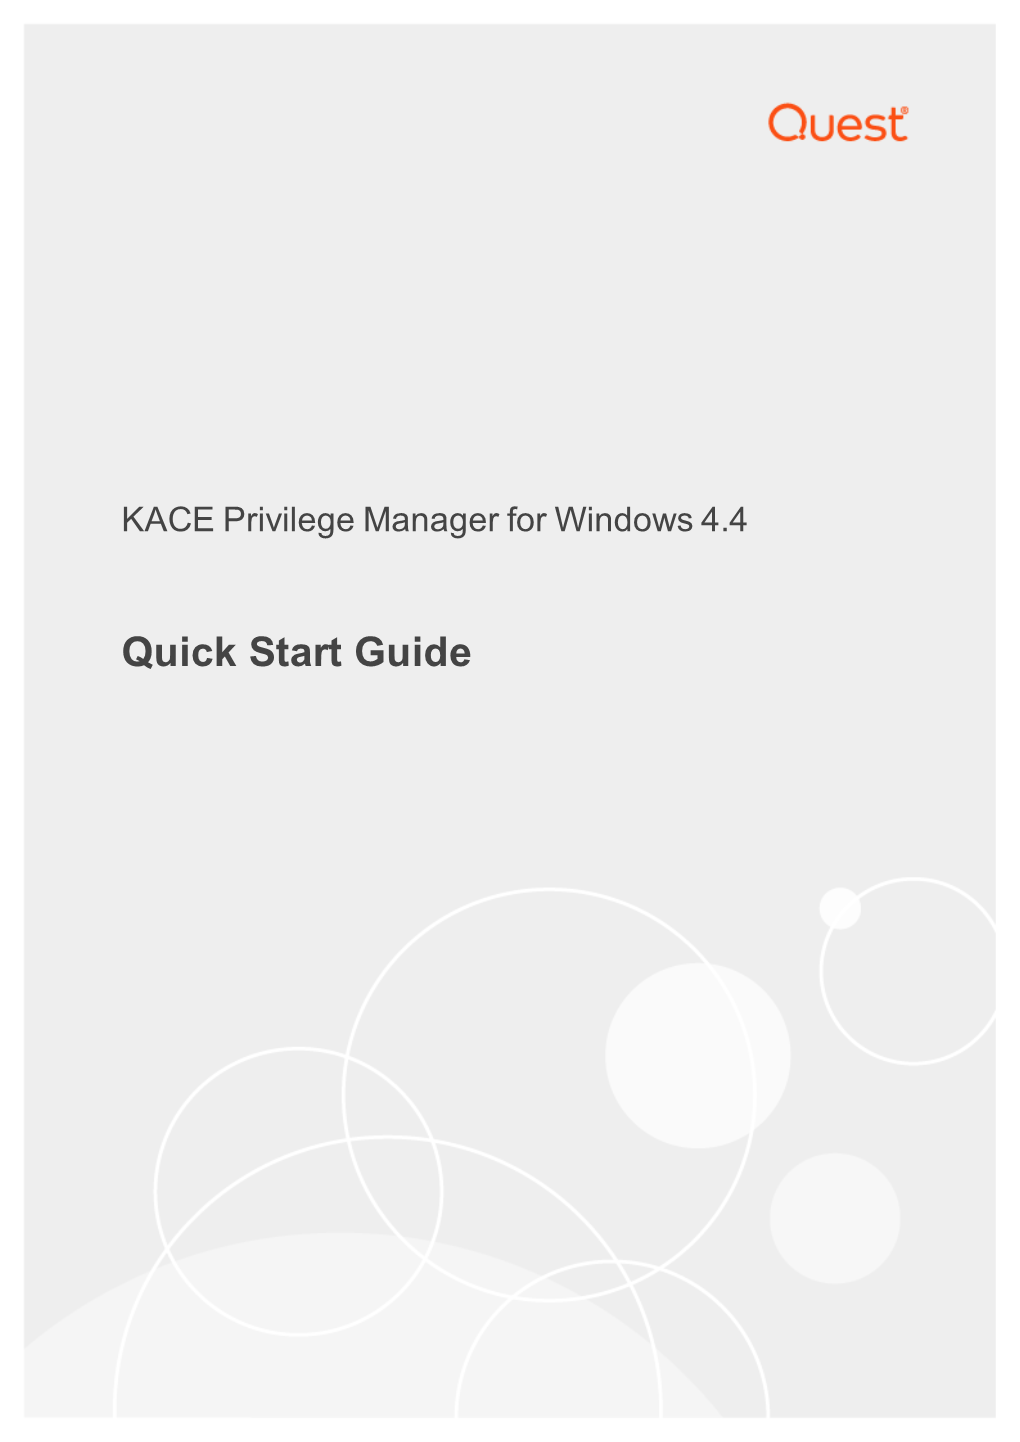 KACE® Privilege Manager for Windows 4.4 Quick Start Guide